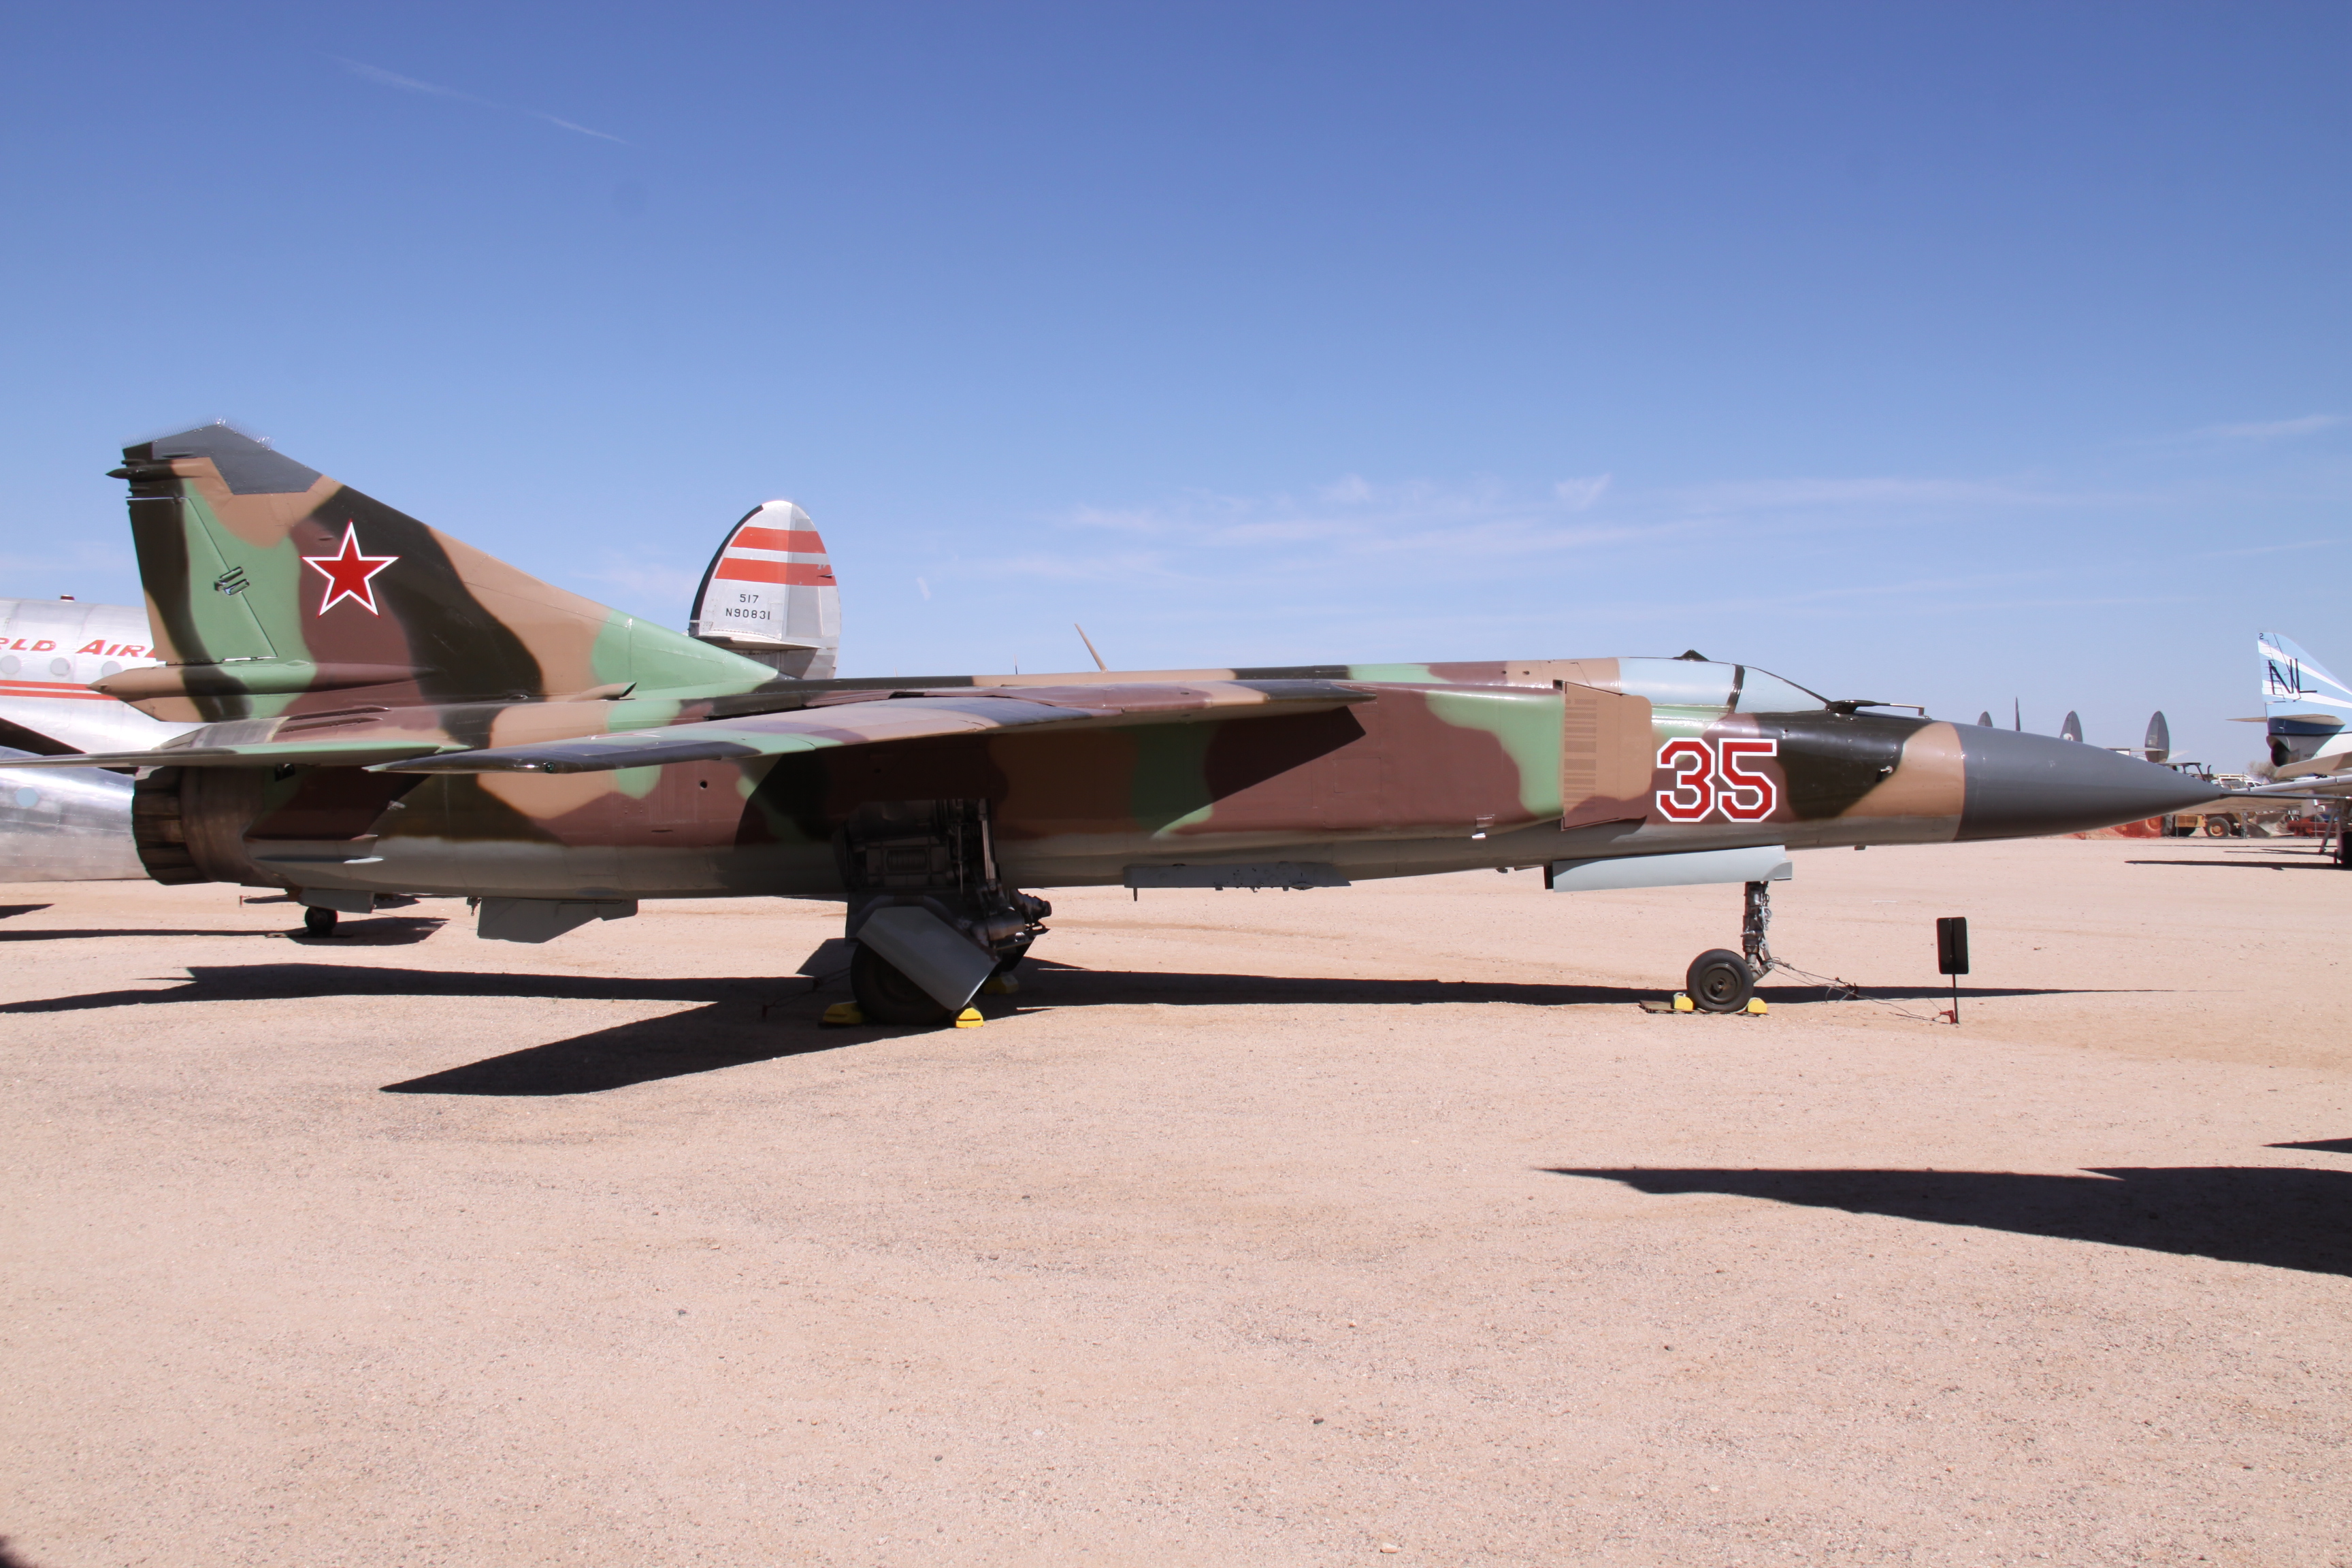 File:35 Red Mikoyan-Gurevich Mig-23MLD Flogger-K Soviet Air Force ( 23709 )  (8738050607).jpg - Wikimedia Commons